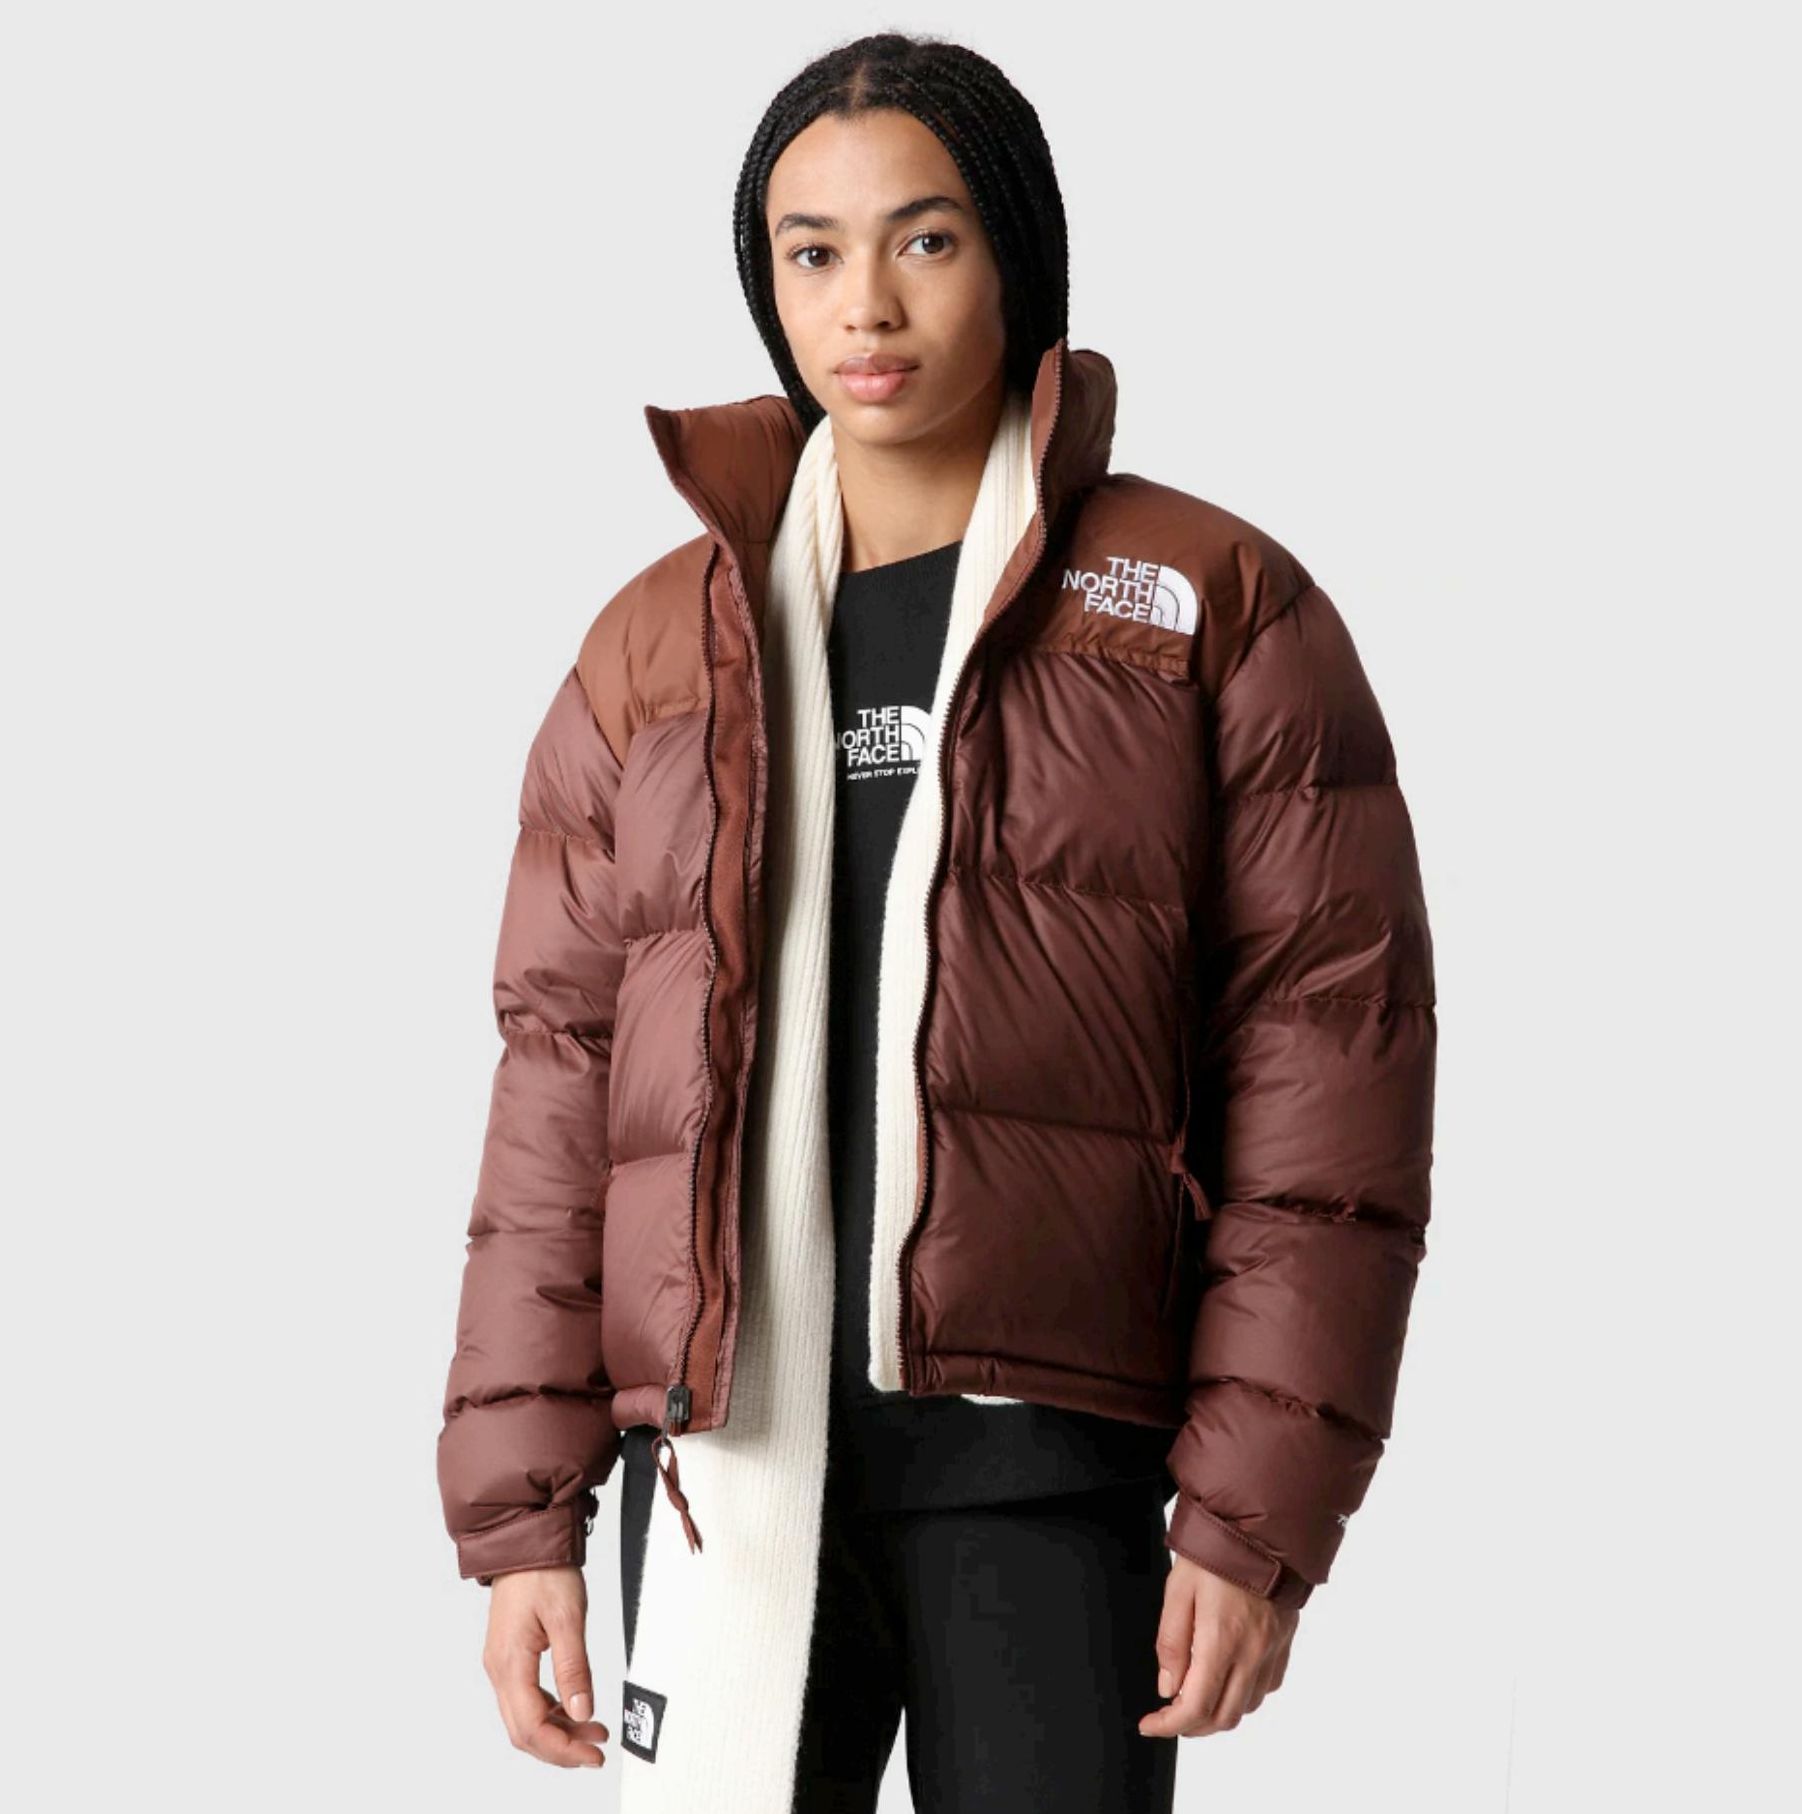 Saison angebot in The North Face